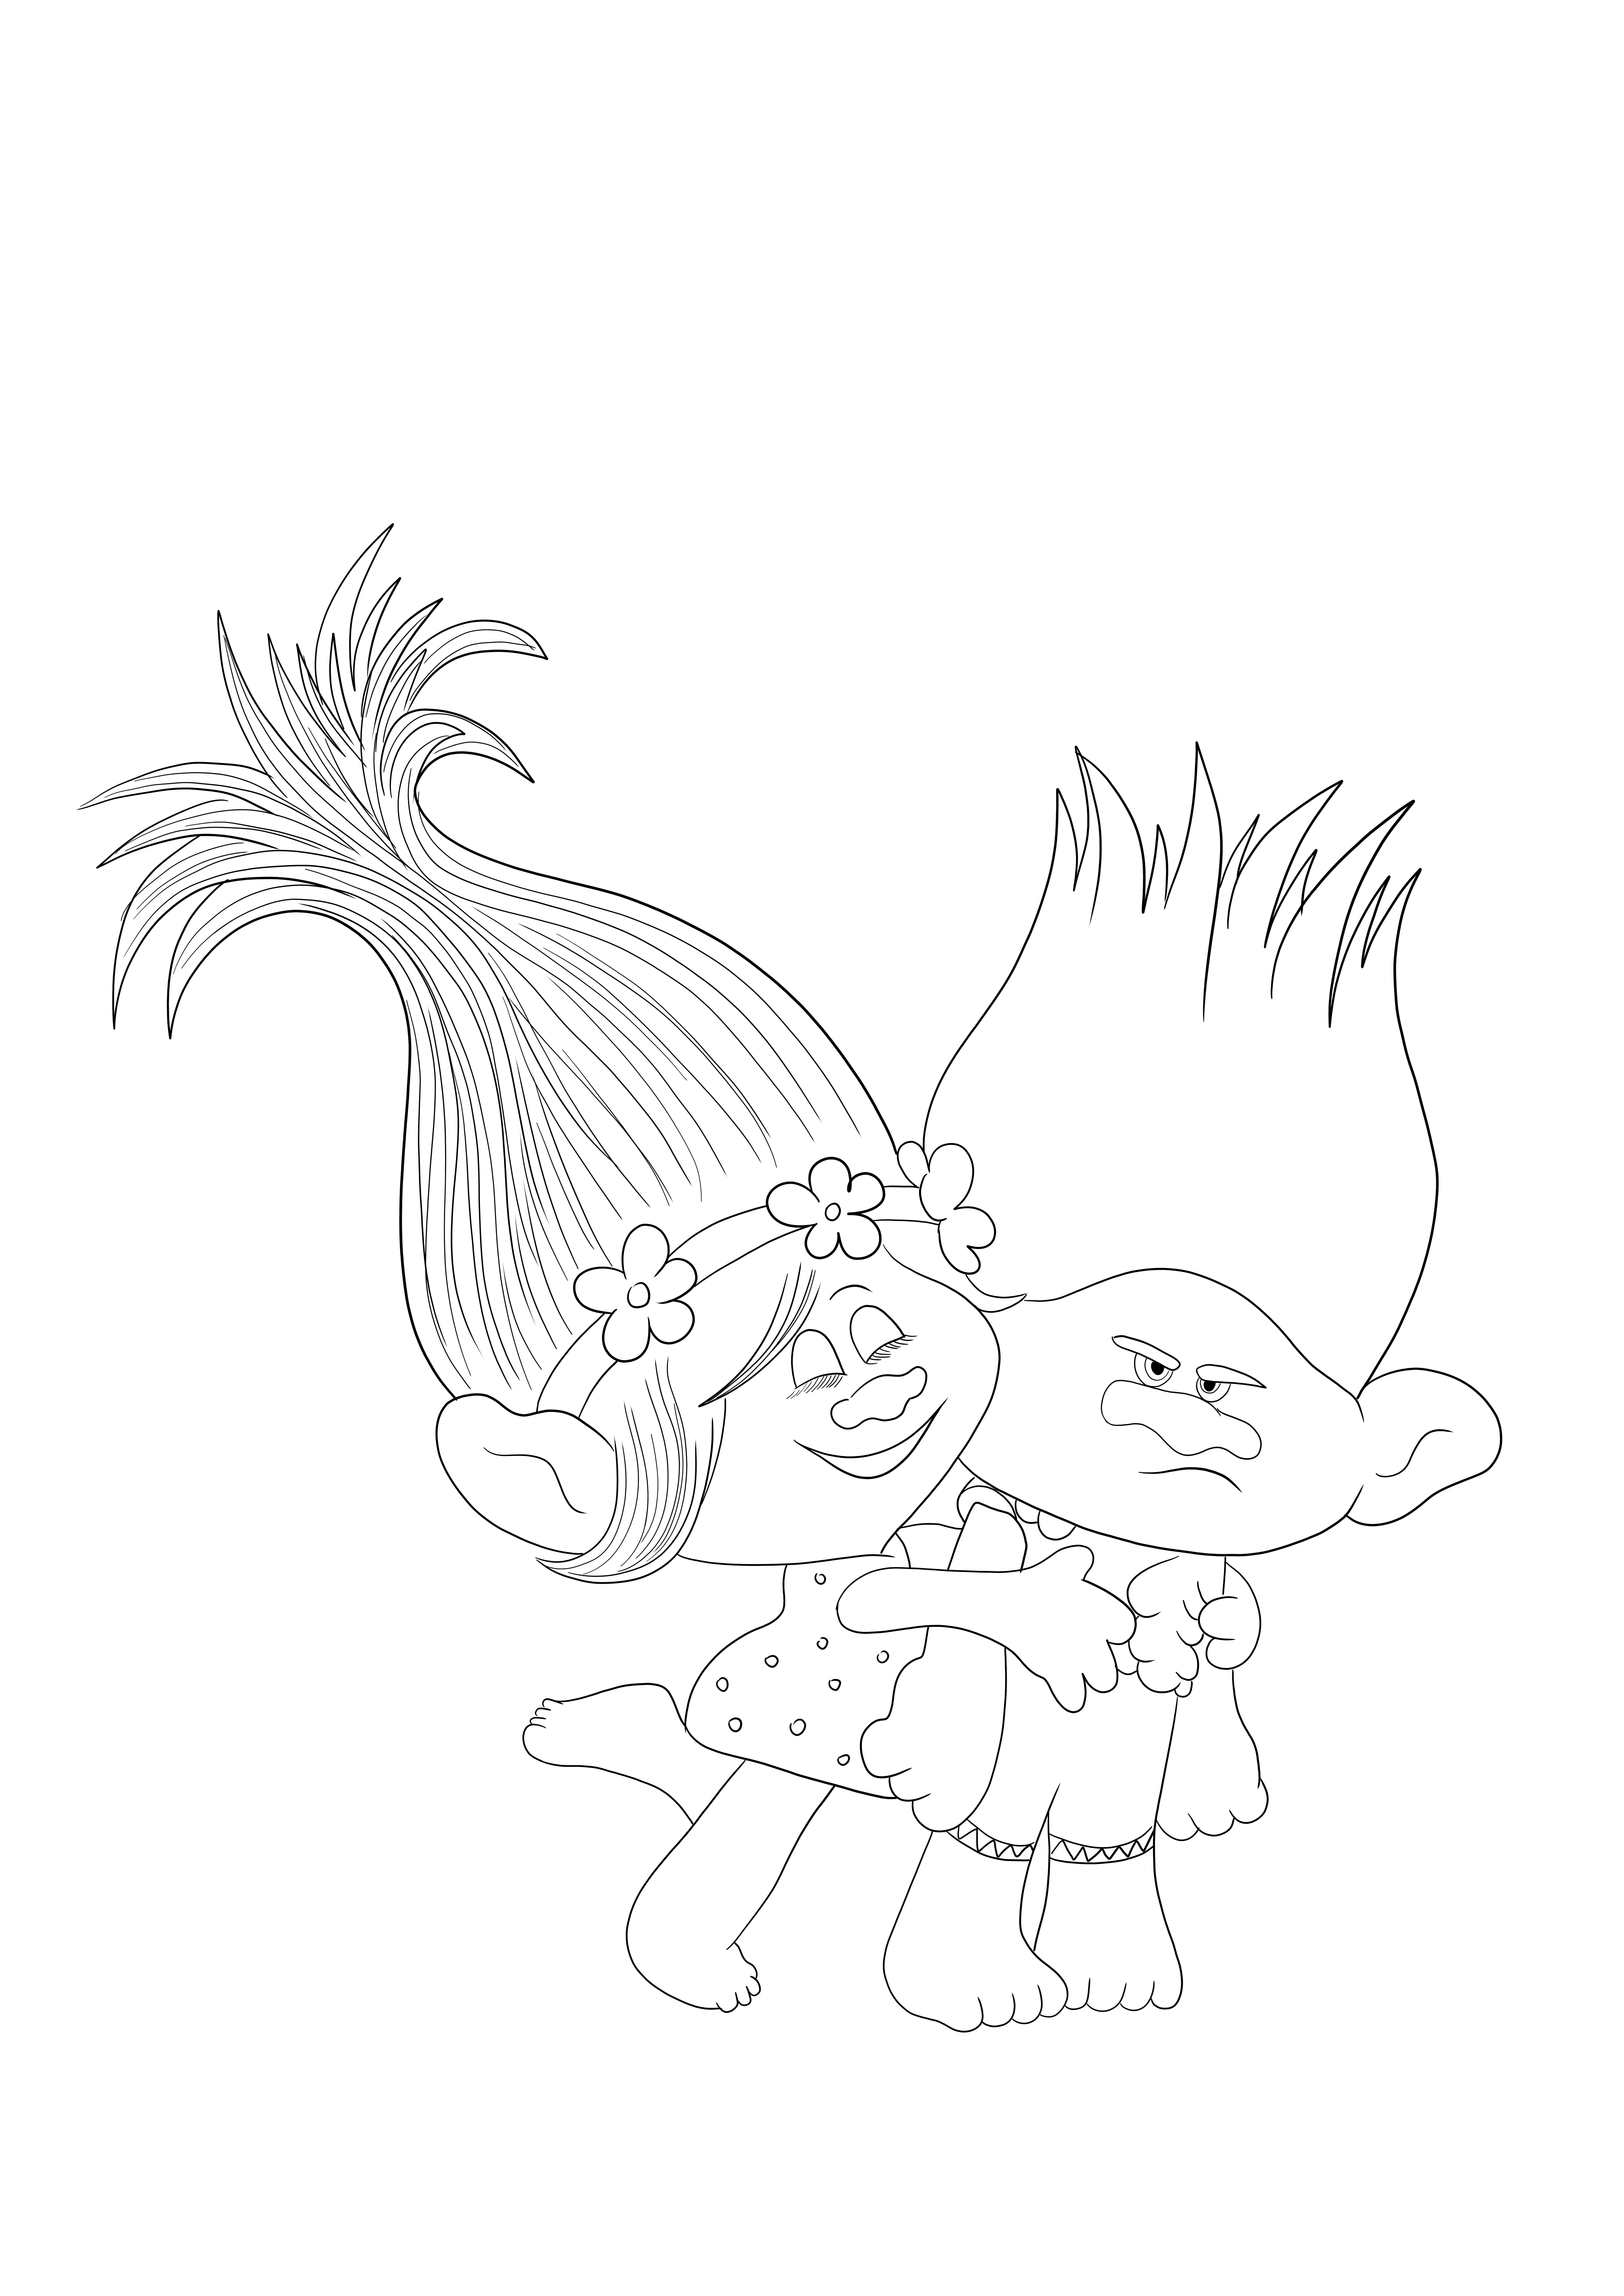 Branch & Poppy from Trolls to color and print-free image